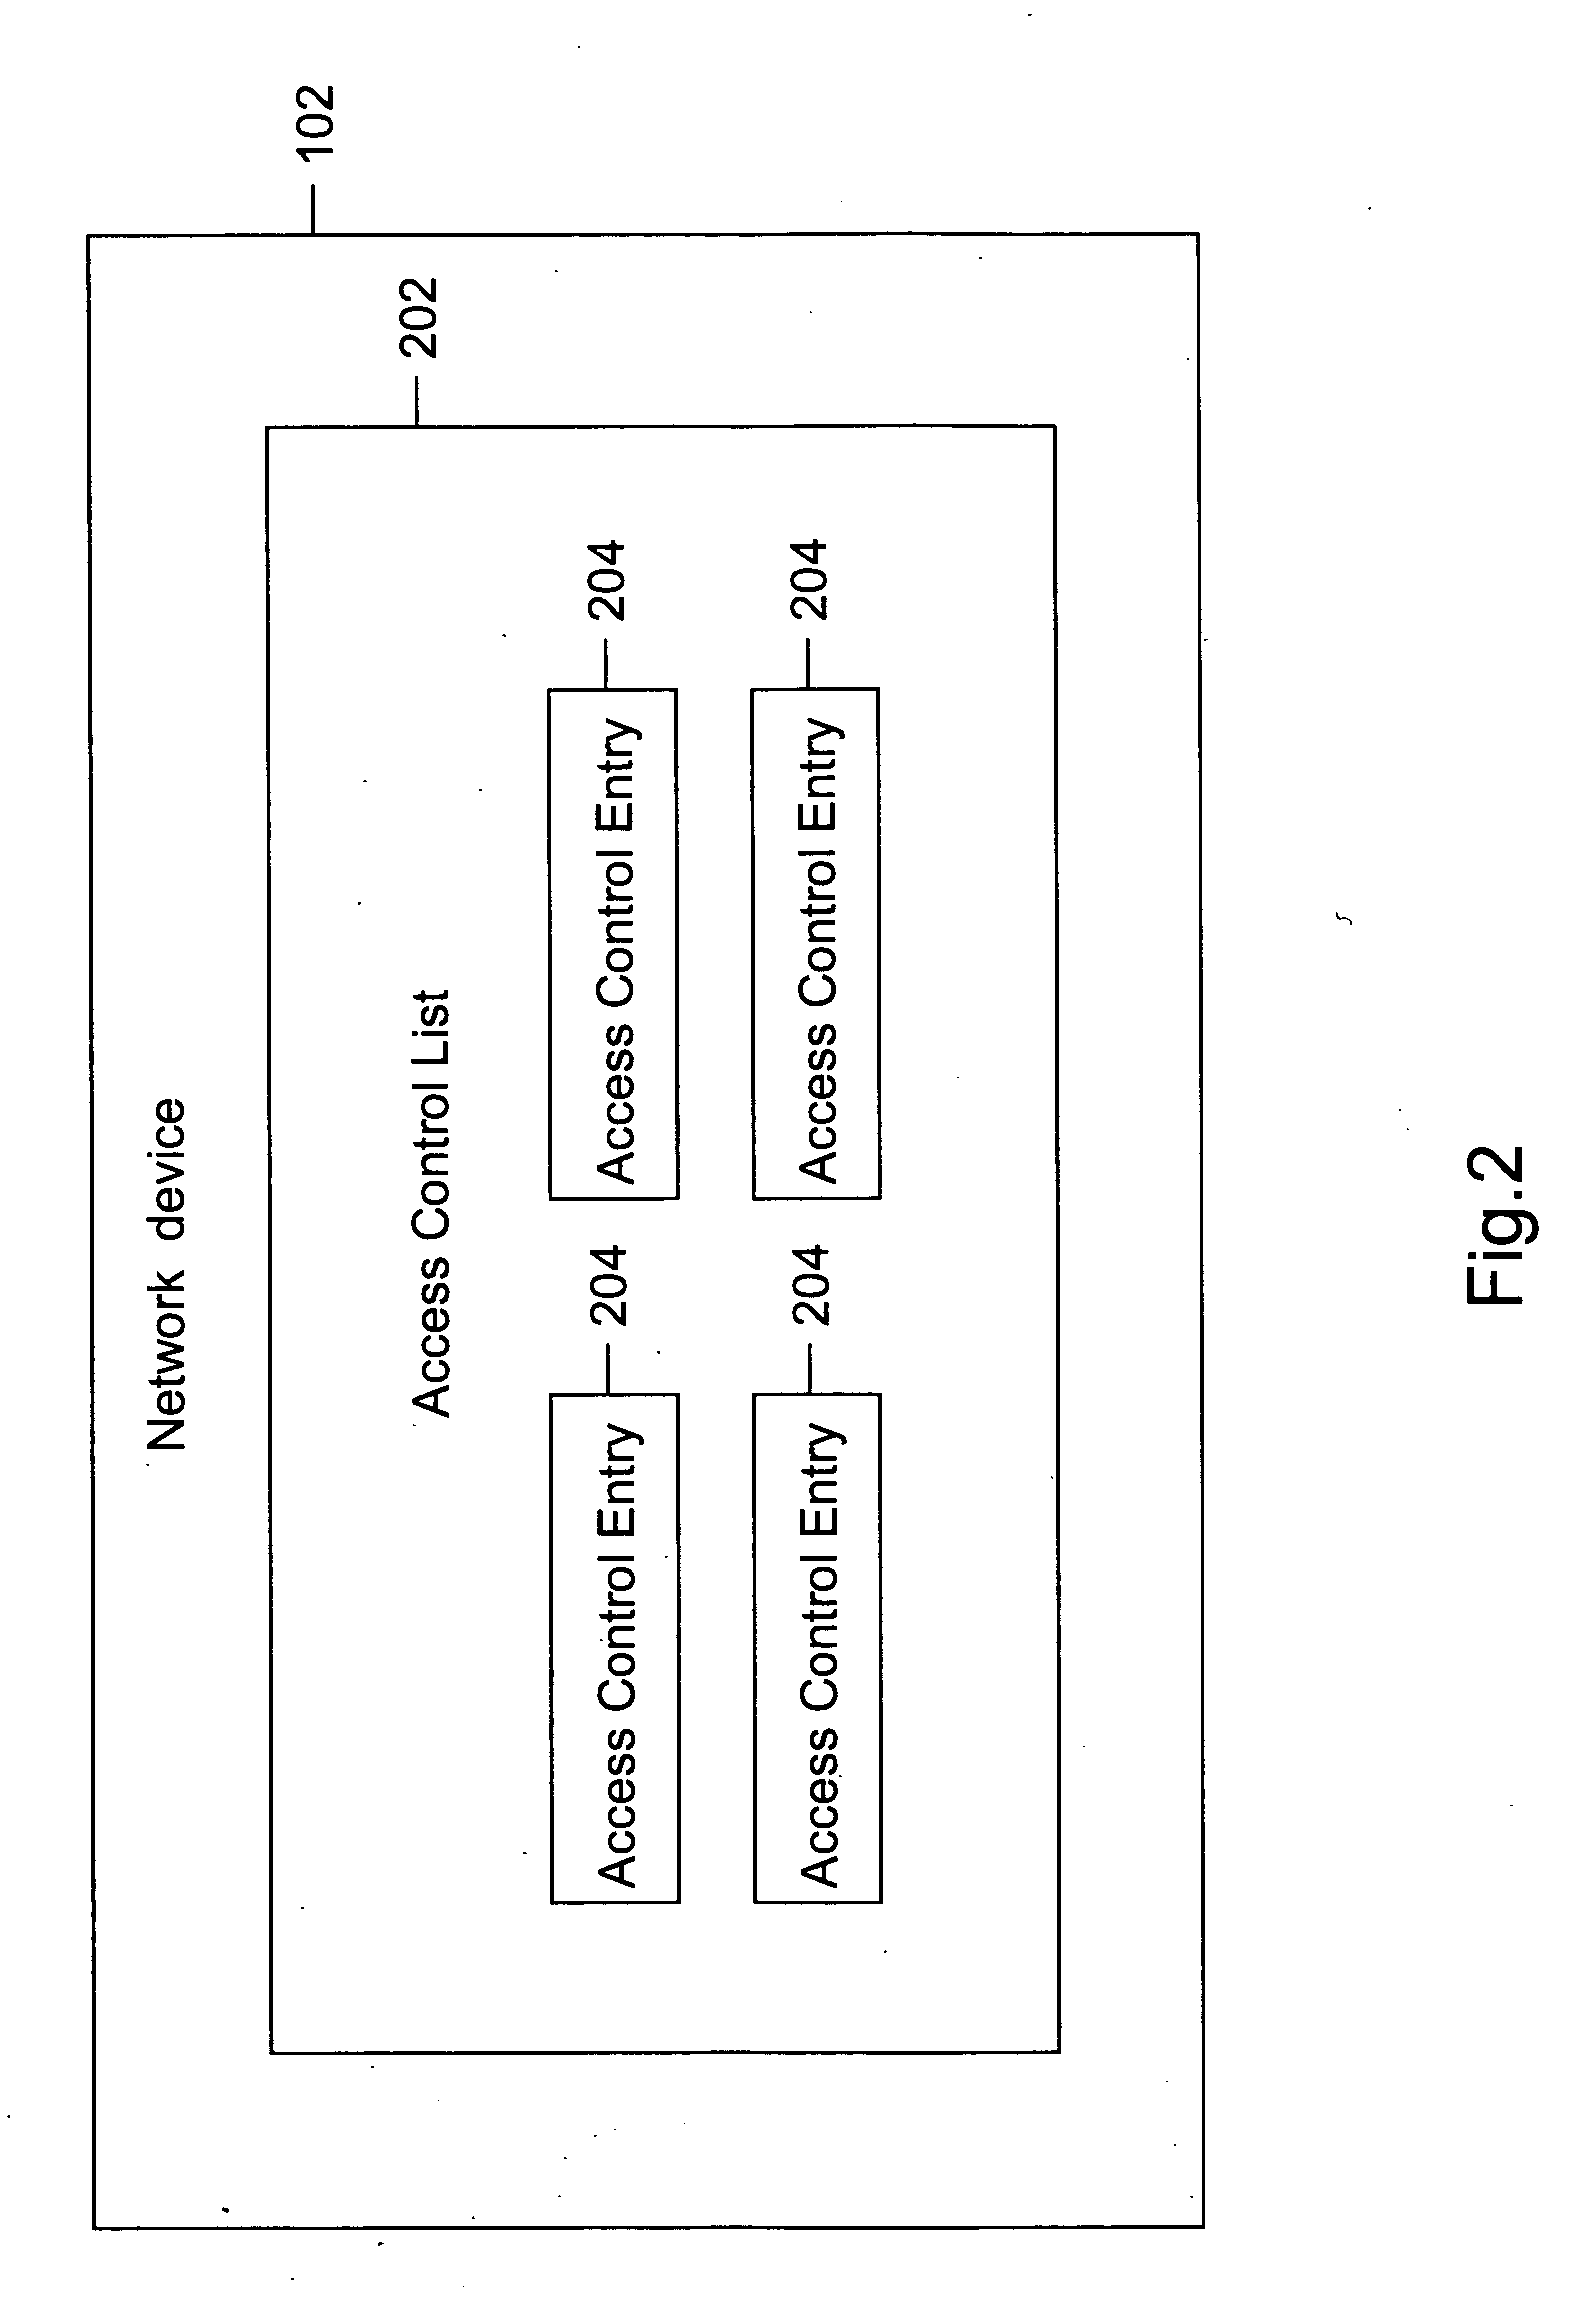 Method and system for removing dead access control entries (ACEs)